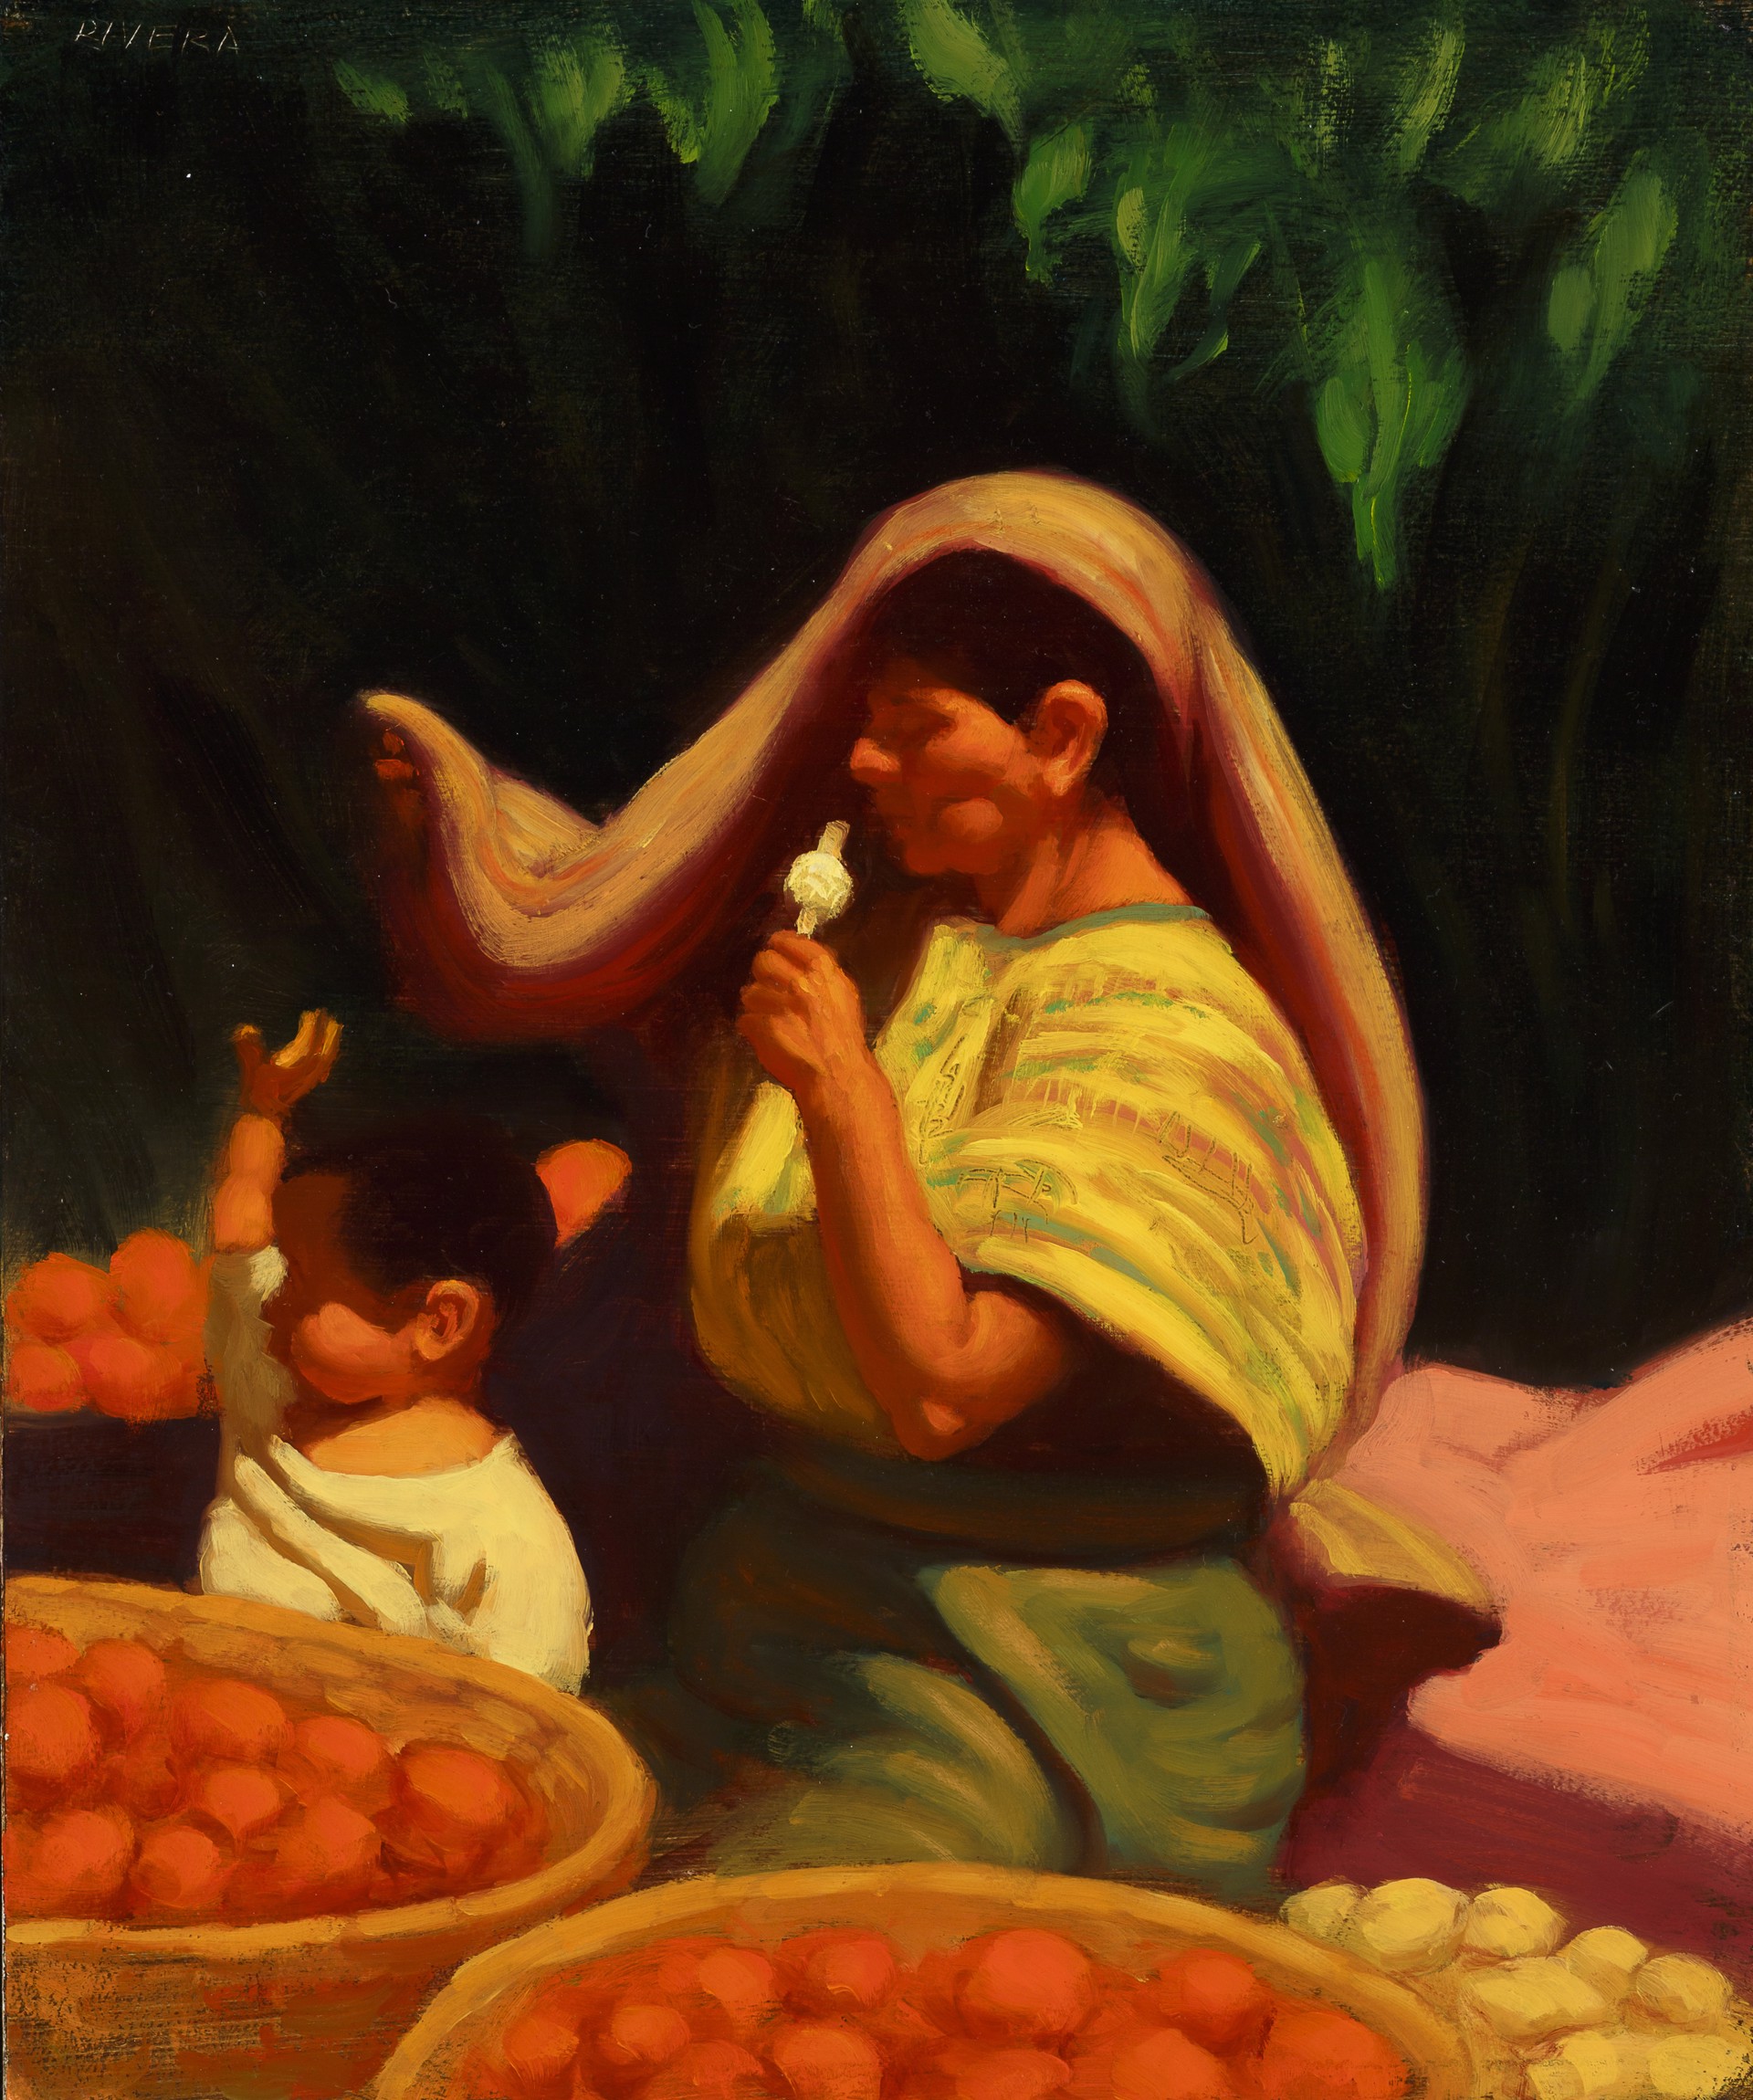 Untitled (Woman & Child in Market) by Elias Rivera